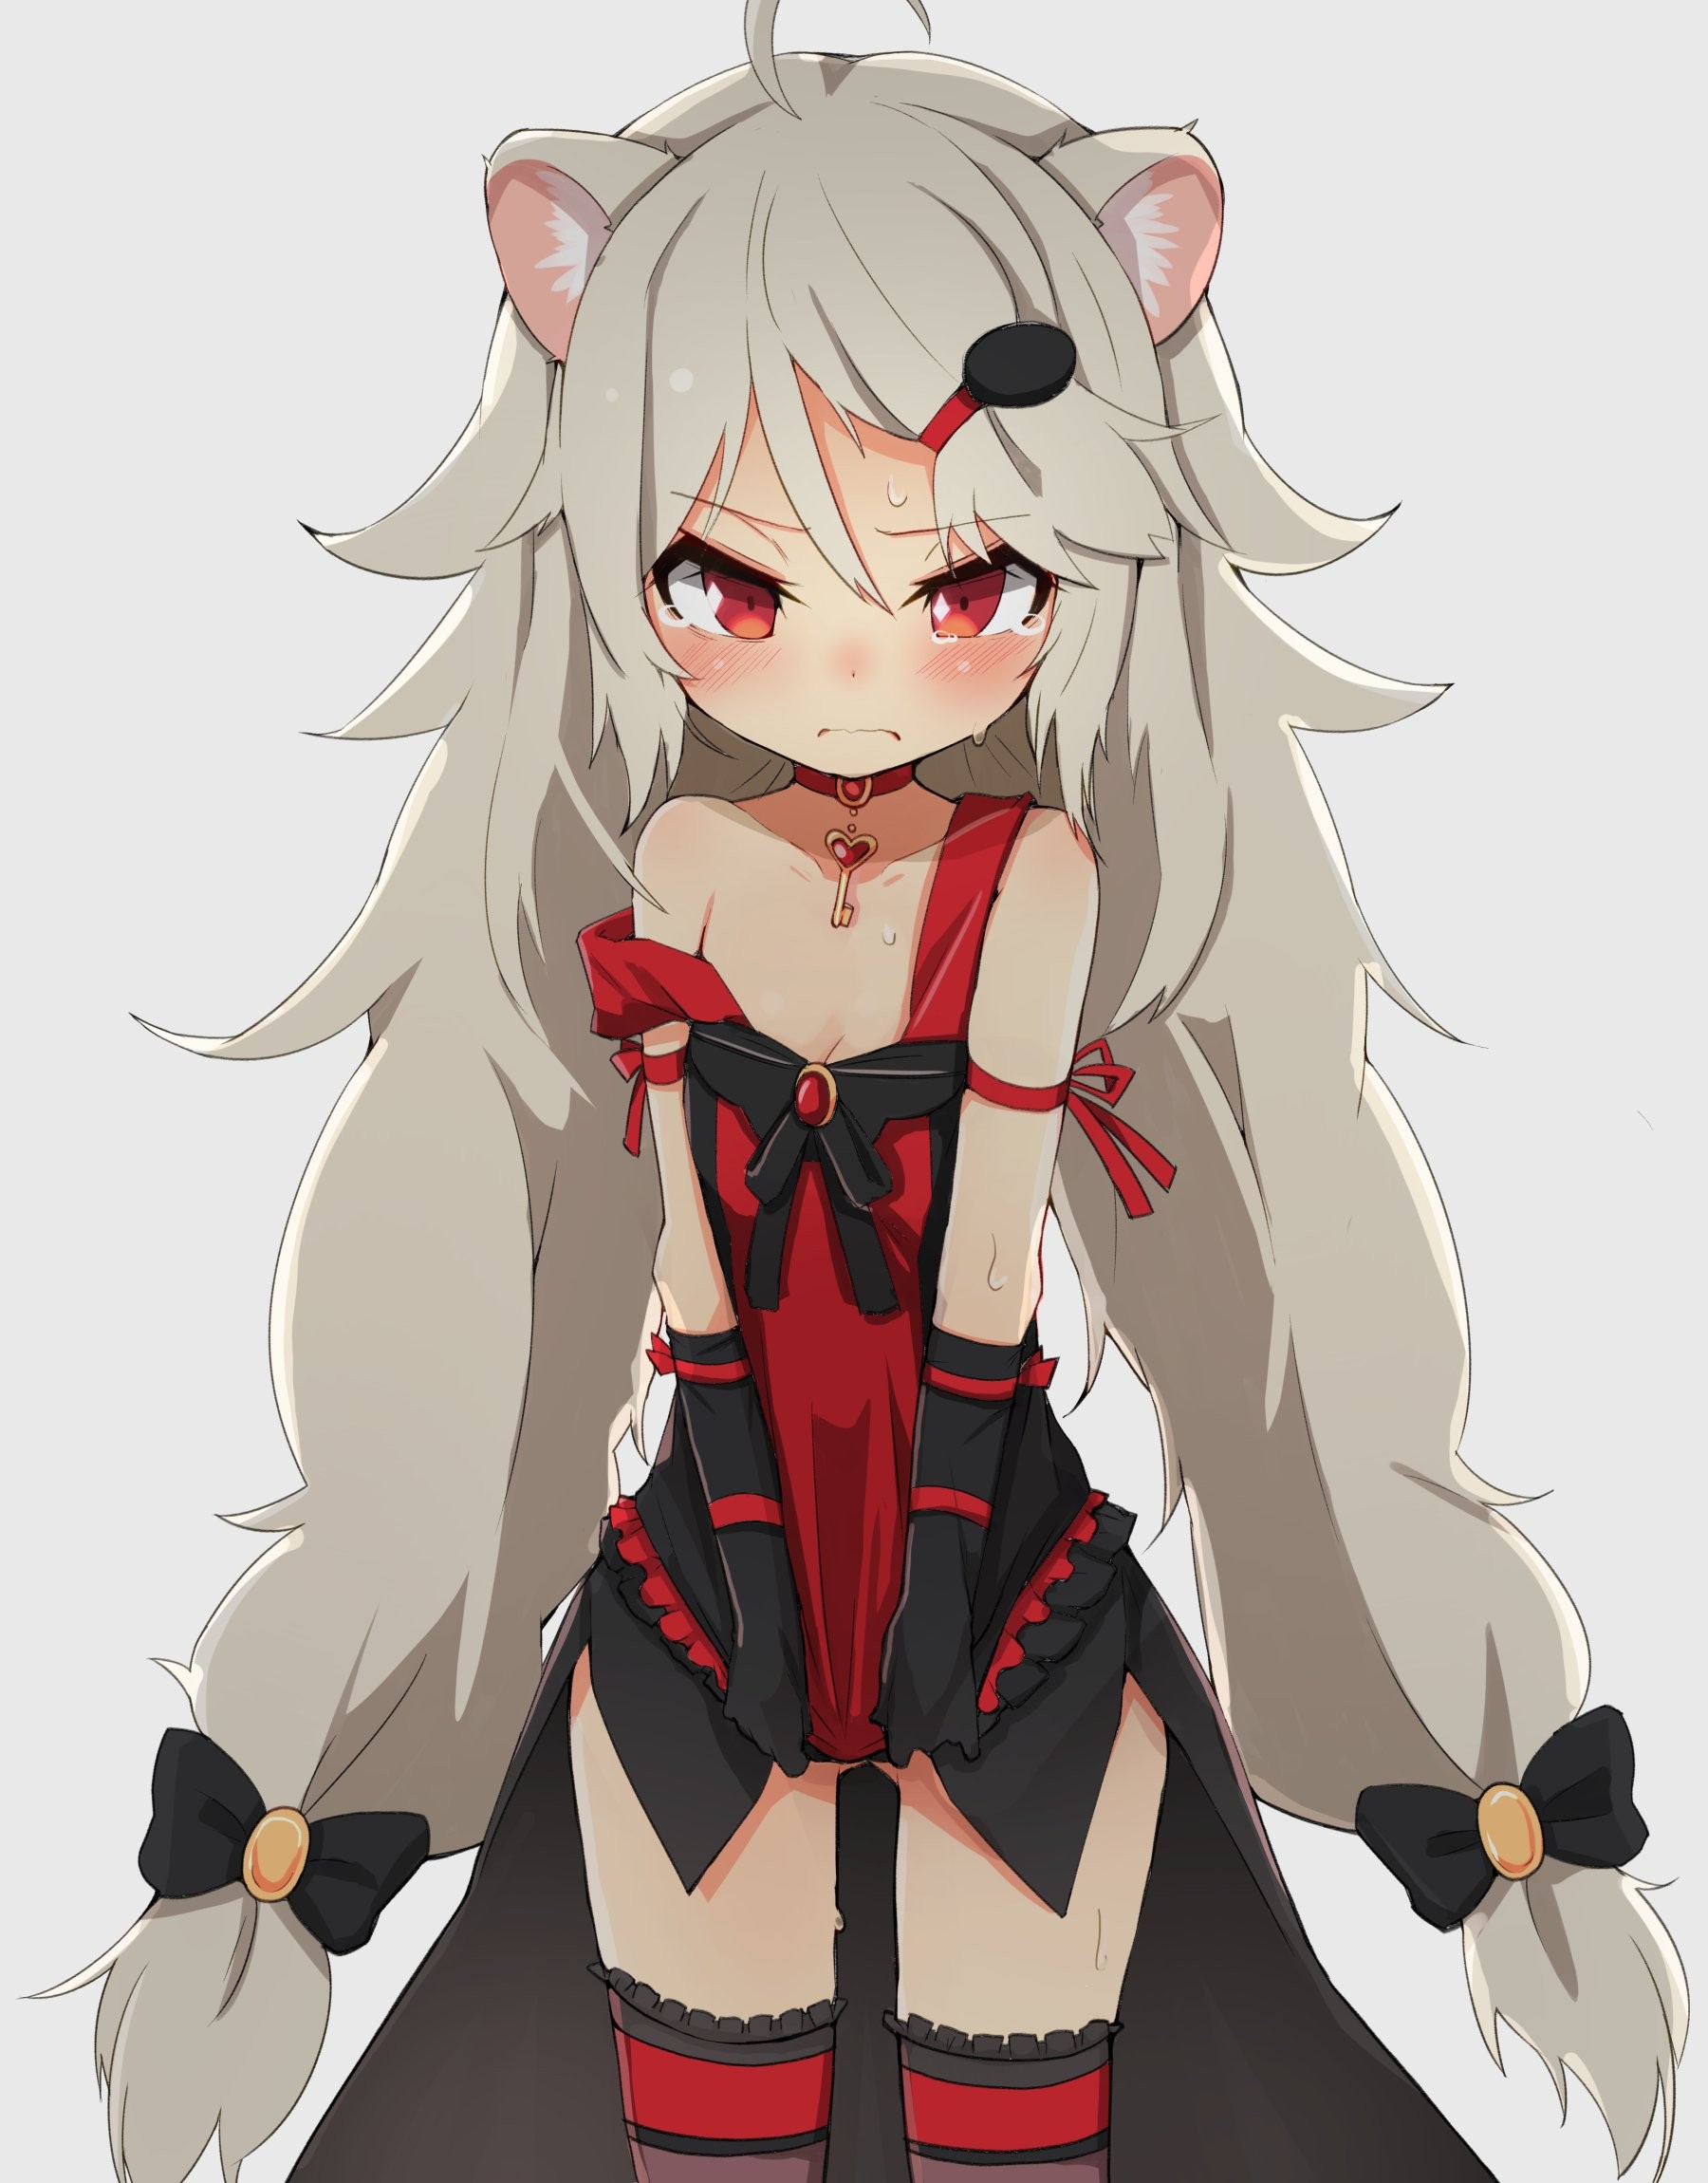 Anime 1800x2300 anime anime girls Show By Rock!! animal ears cleavage dress long hair gray hair red eyes stockings thigh-highs loli embarrassed blushing tears nopan pulling clothing